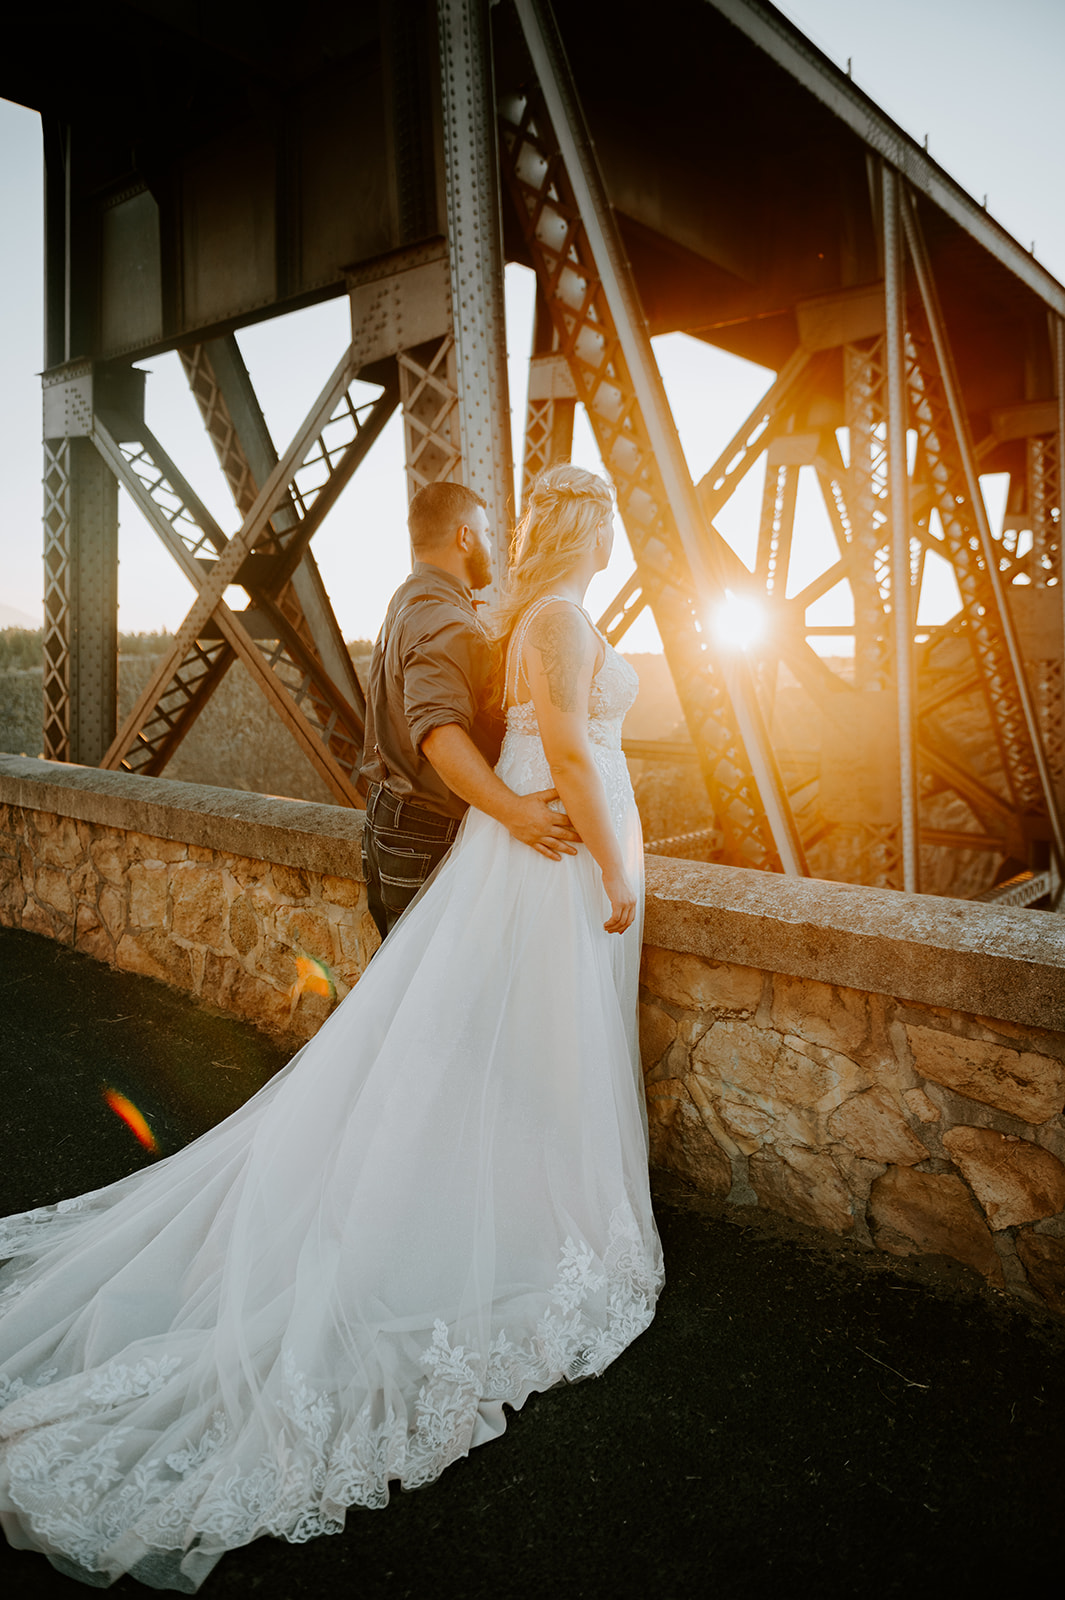 Bride and groom overlooking the peter Ogden state park at sunset